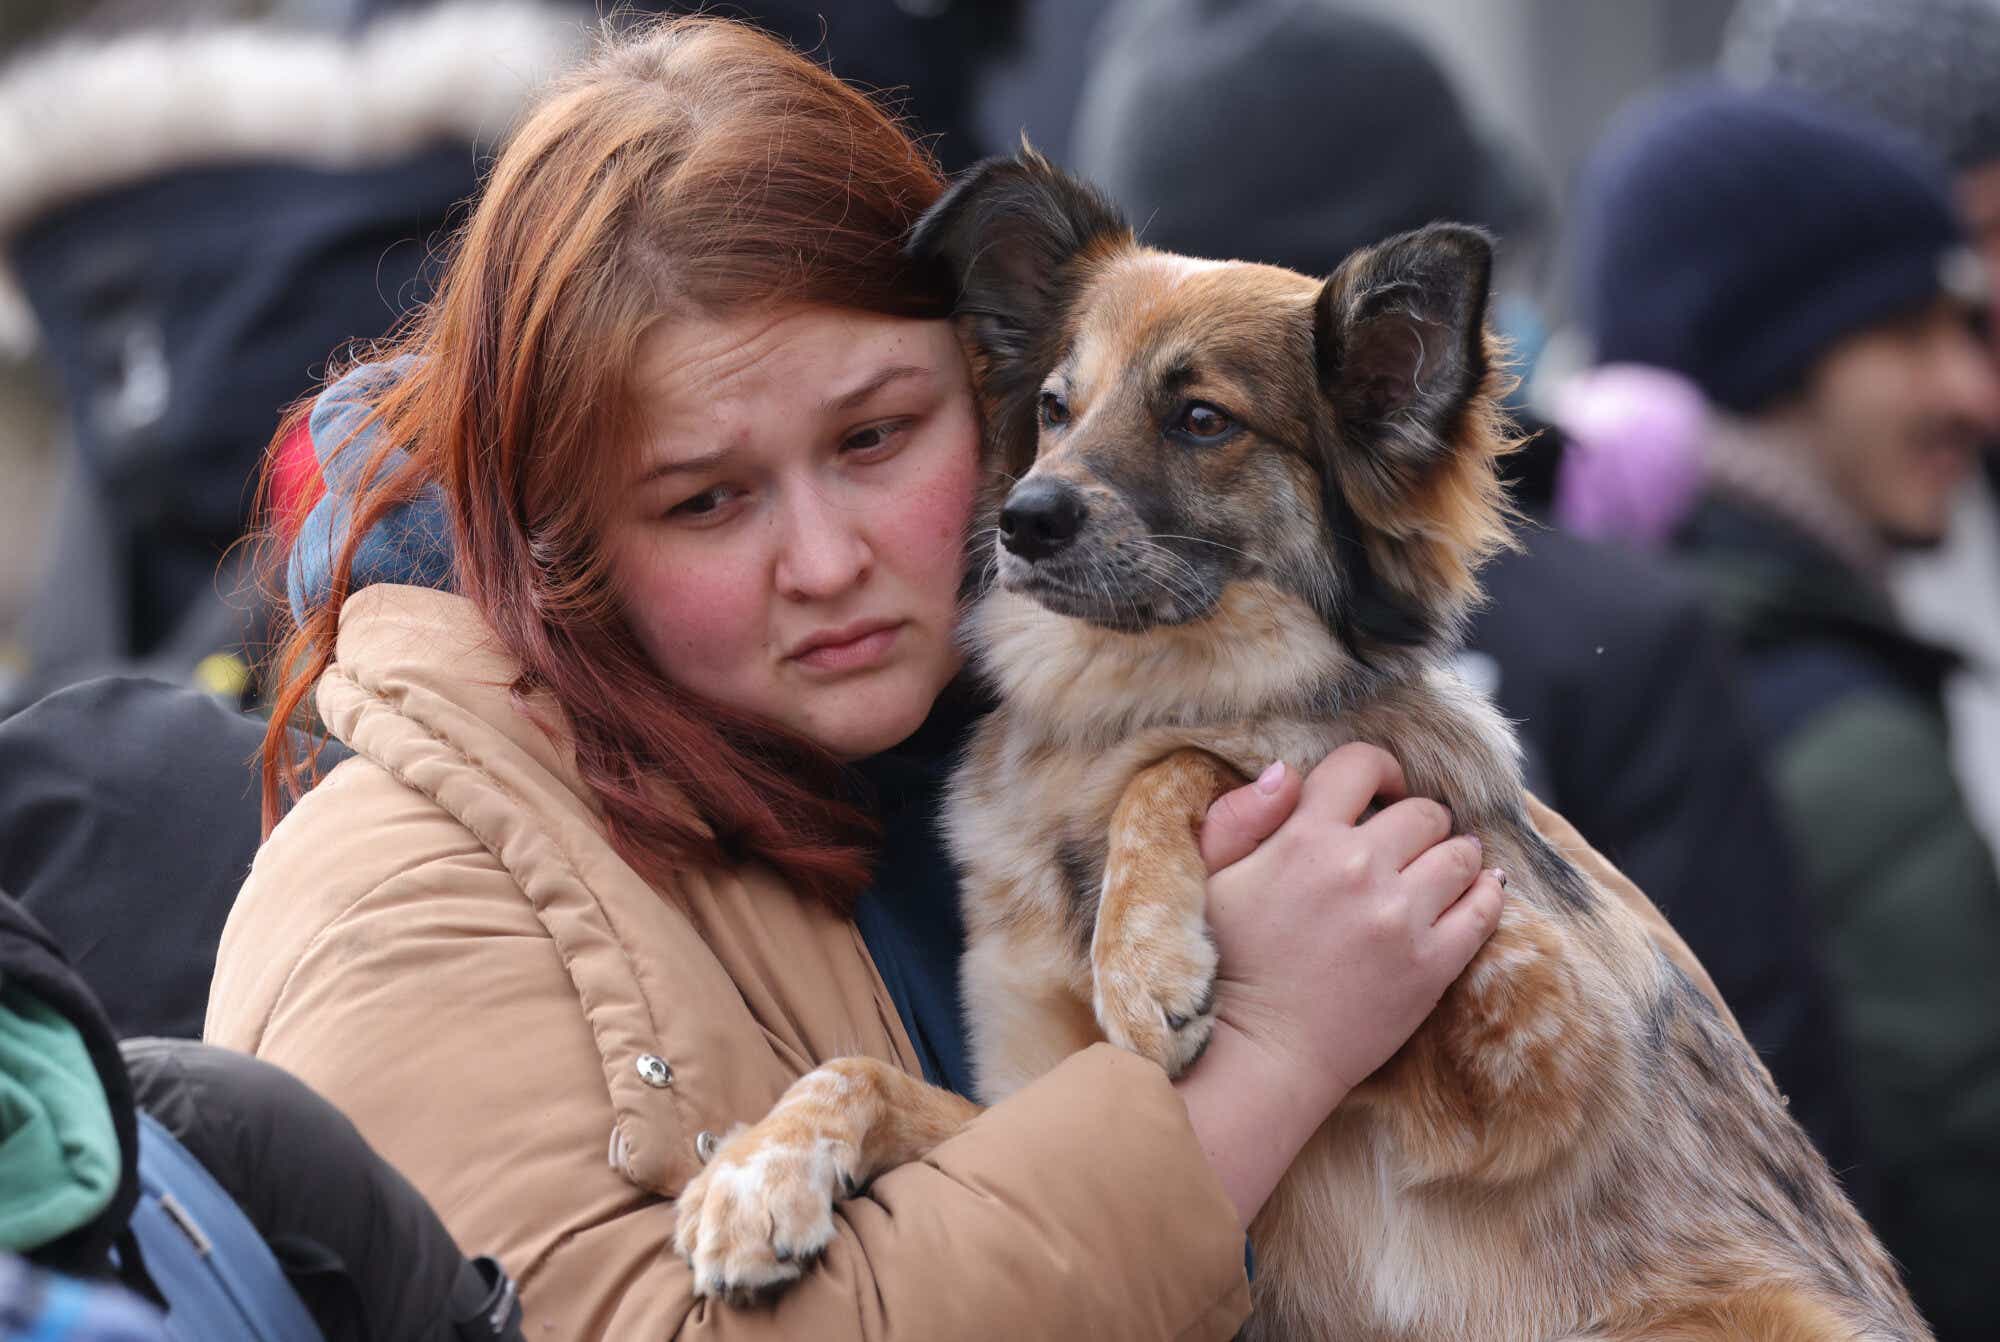 A young woman arriving from Ukraine clutches her dog as they wait